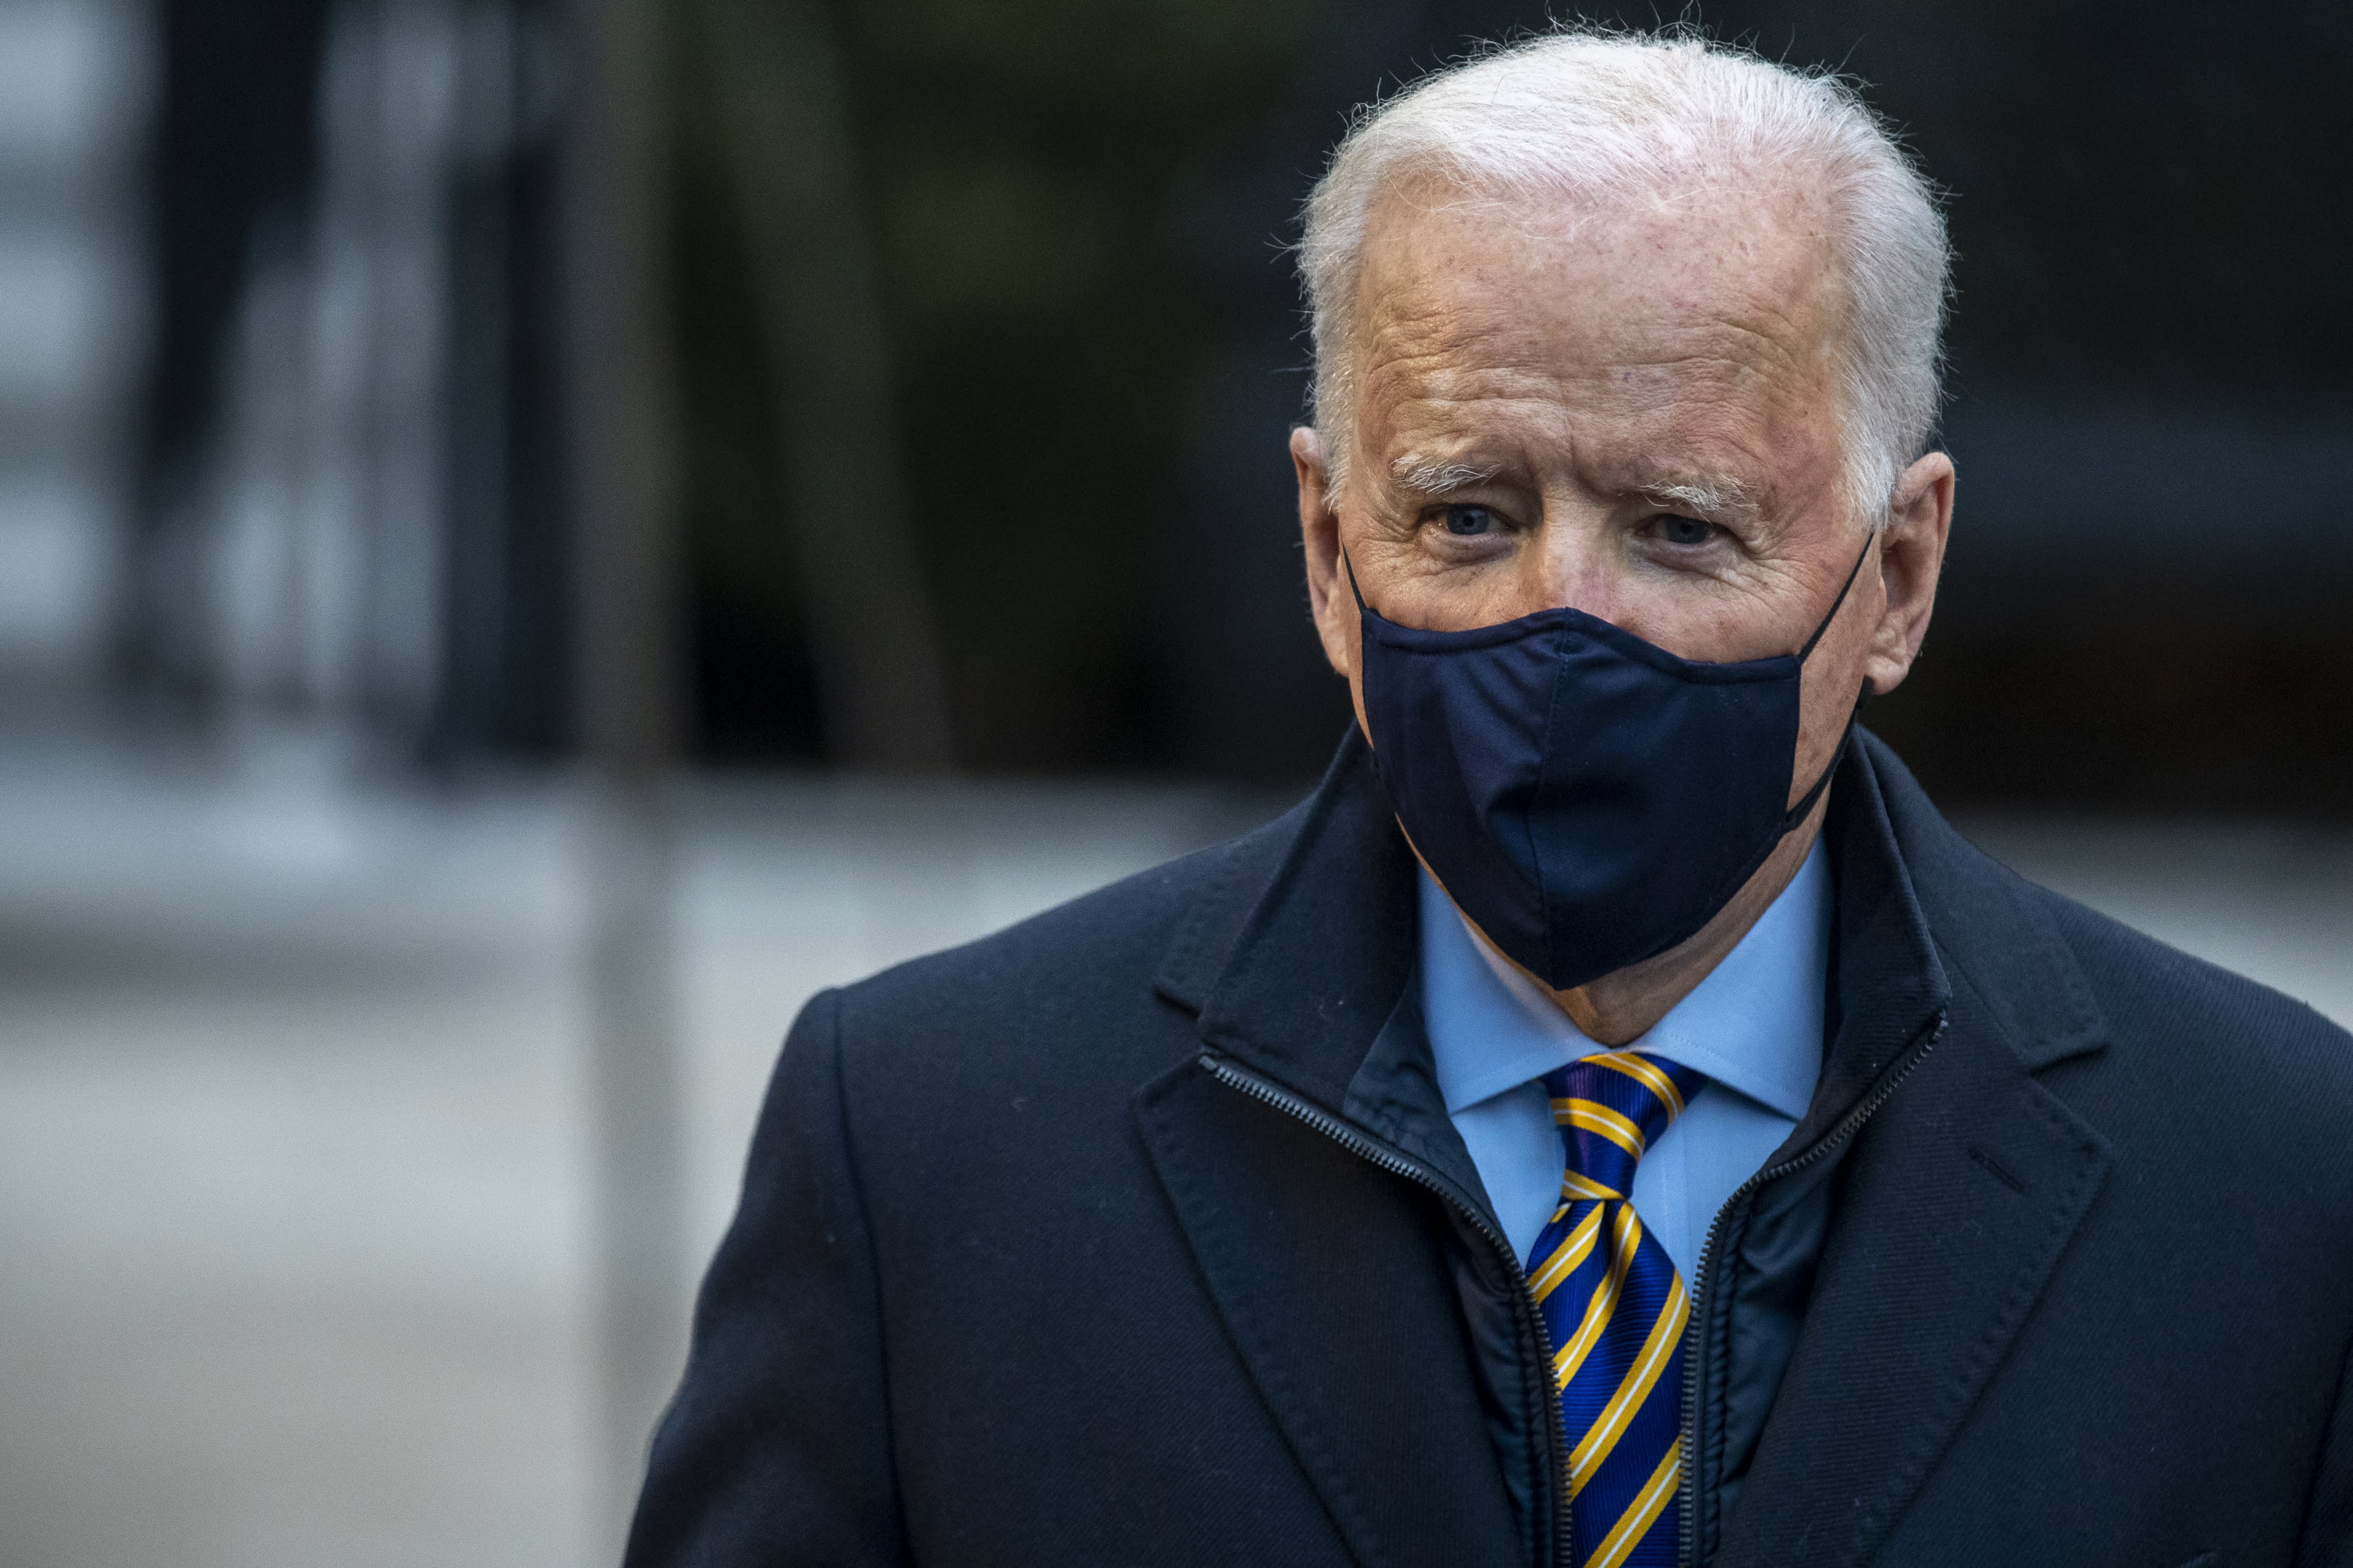 State Attorney Generals ask Biden to forgive $ 50,000 in student debt